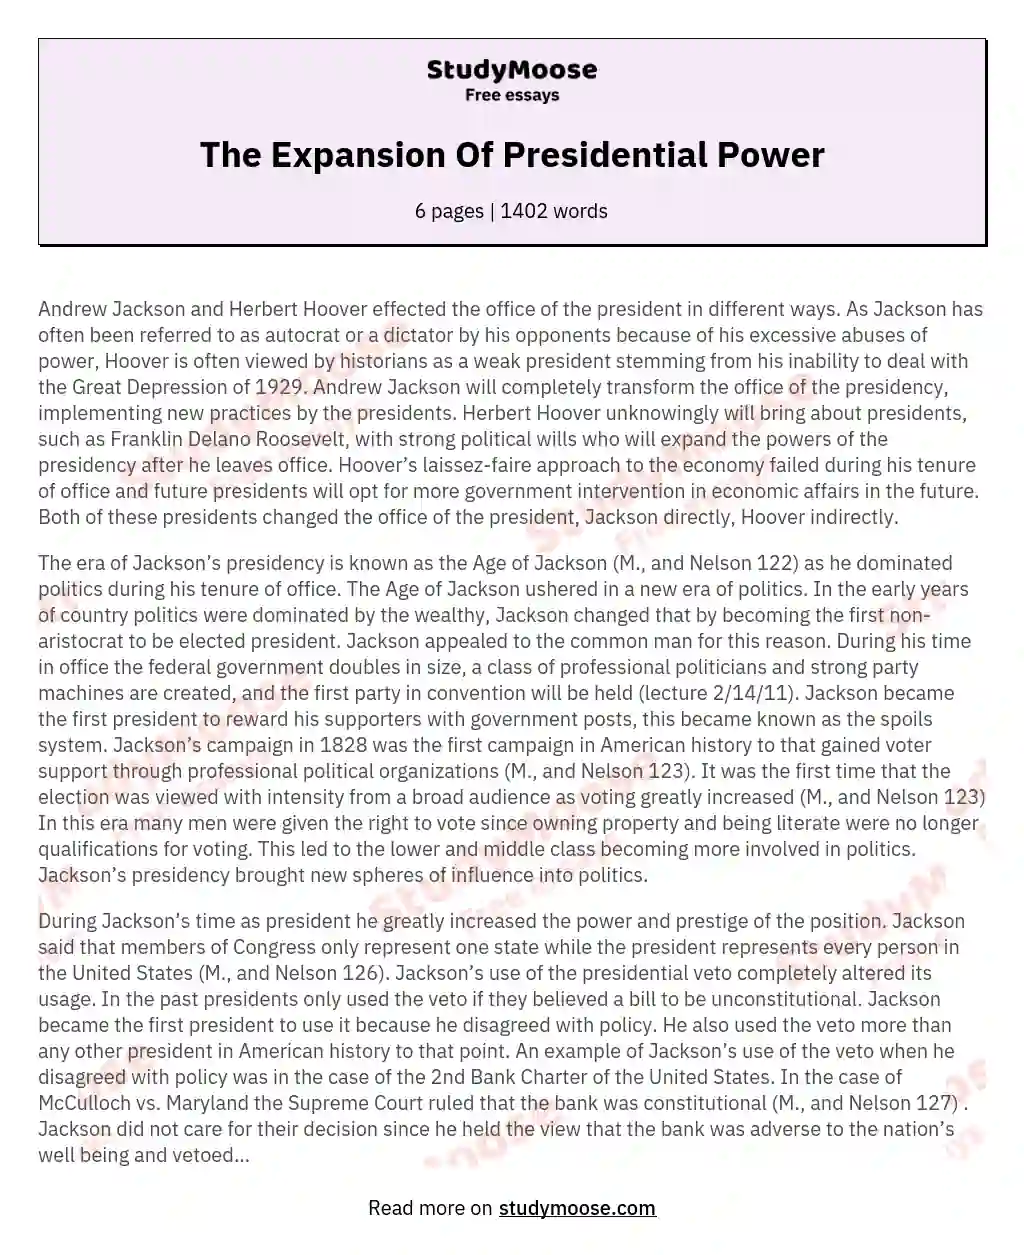 The Expansion Of Presidential Power essay